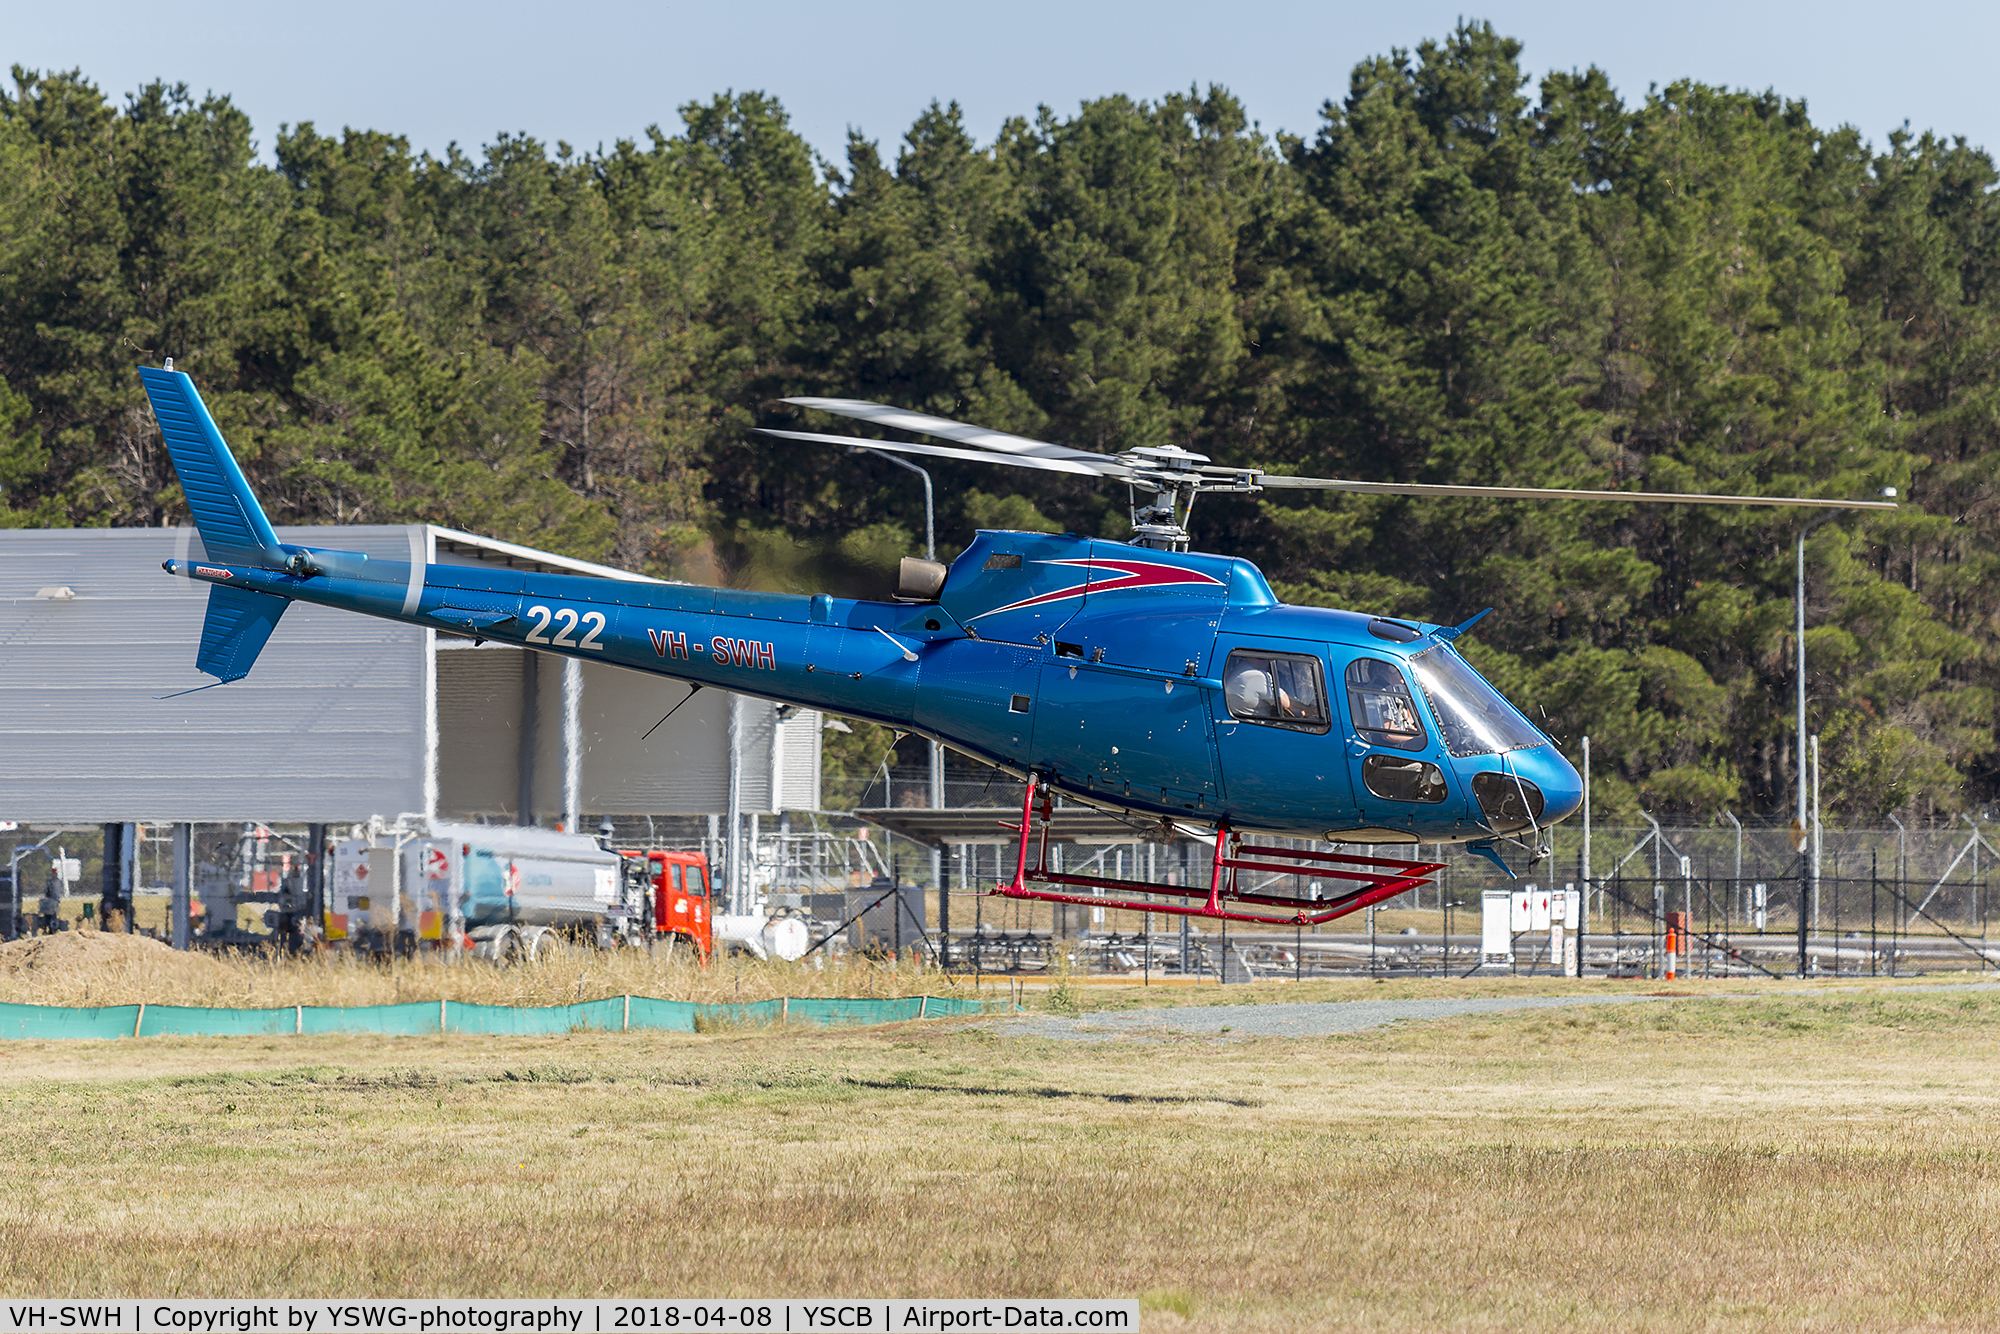 VH-SWH, 1982 Aerospatiale AS-350BA Ecureuil C/N 1676, Ae?rospatiale AS 350BA Ecureuil (VH-SWH) operating joy flights at the 2018 Canberra Airport open day.